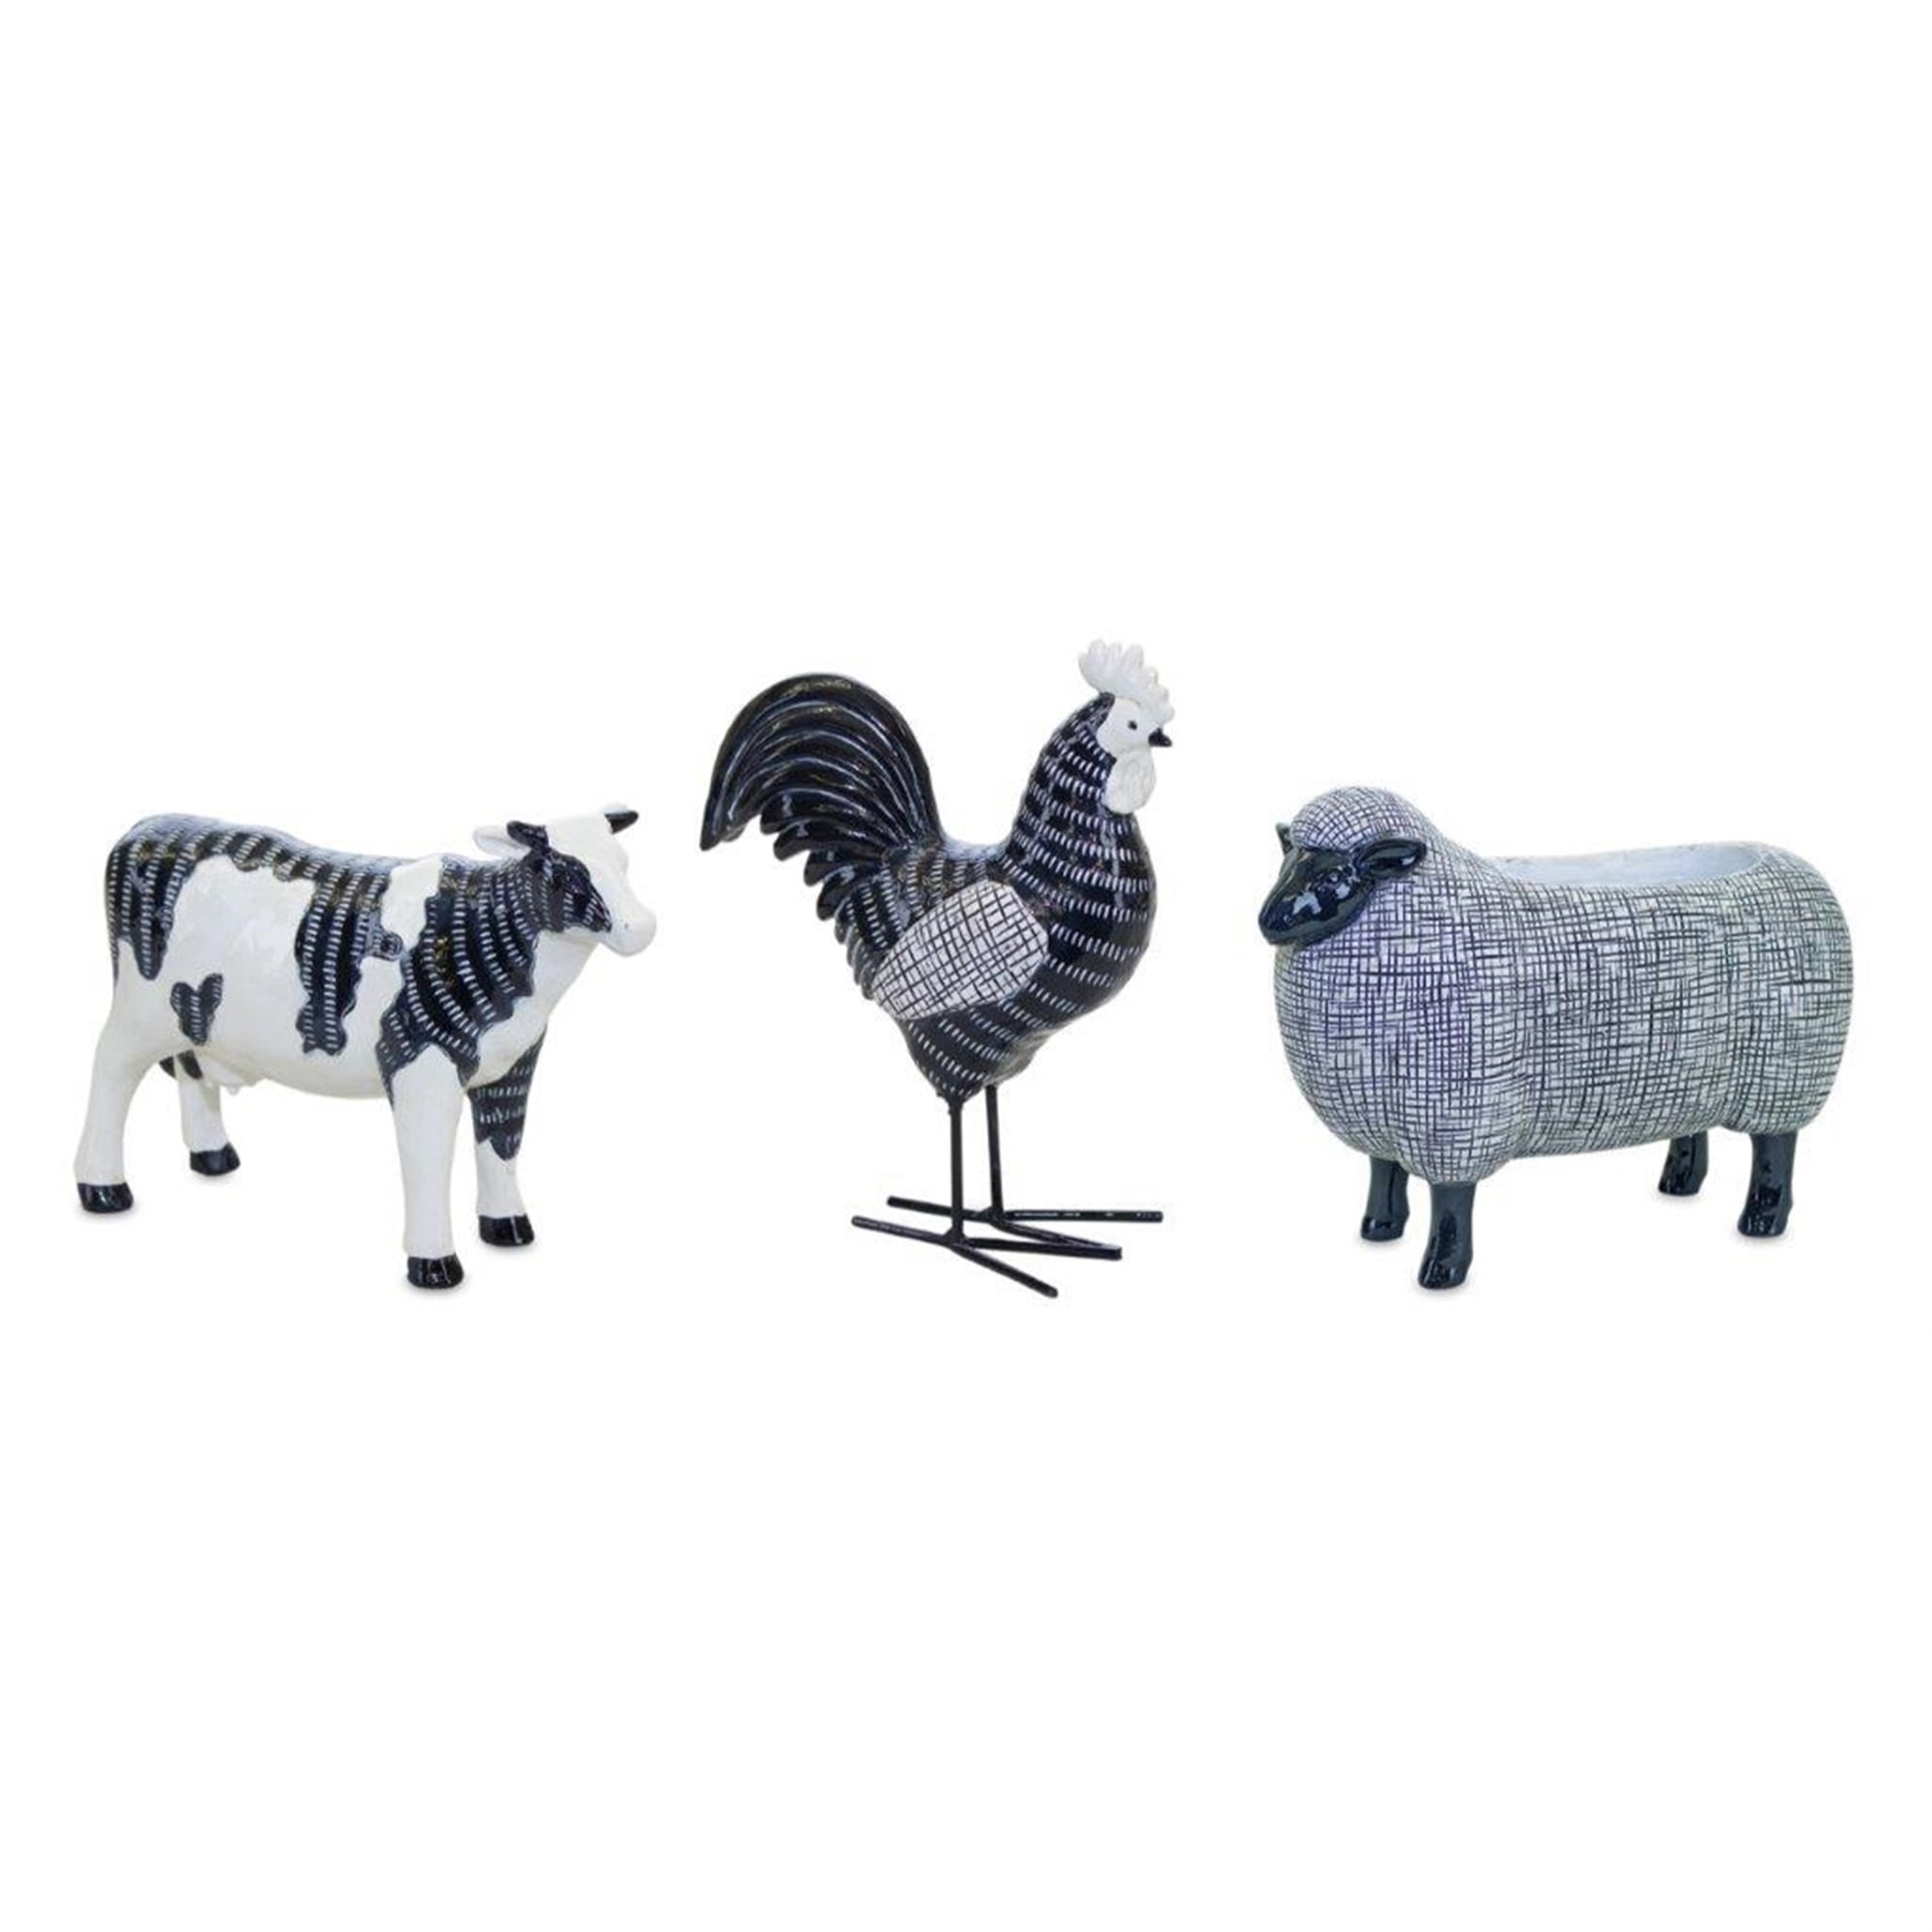 Chicken/Cow/Sheep (Set of 3) 4.25"H, 4.5"H, 6"H Resin